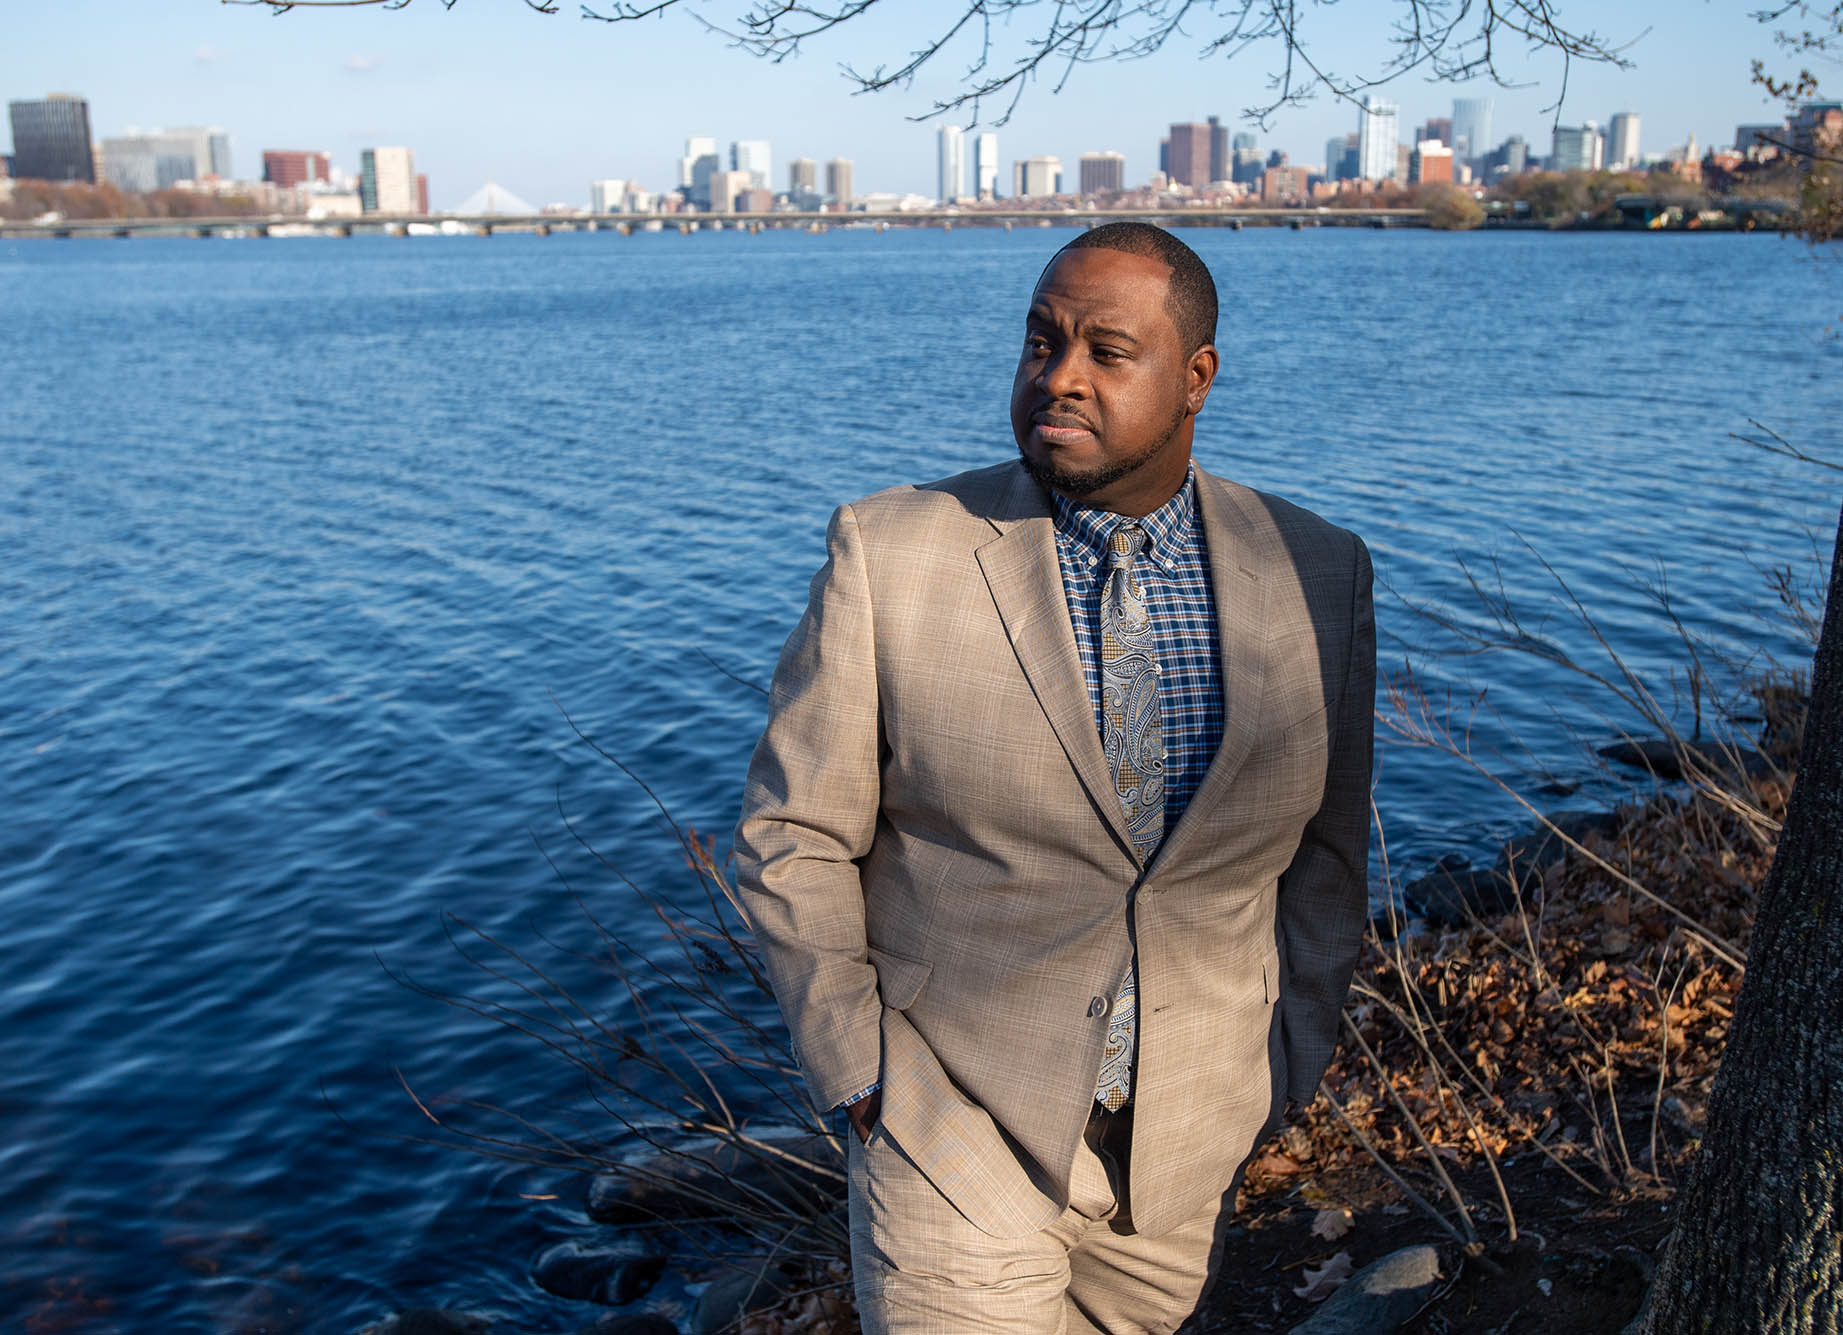 Photo: Rev. Vernon K. Walker posing along the Charles River. A Black man wearing a tan suit and light blue collared shirt looks off to the left as he poses at the bank of a large body of water. The city of Boston can be seen distantly in the background.